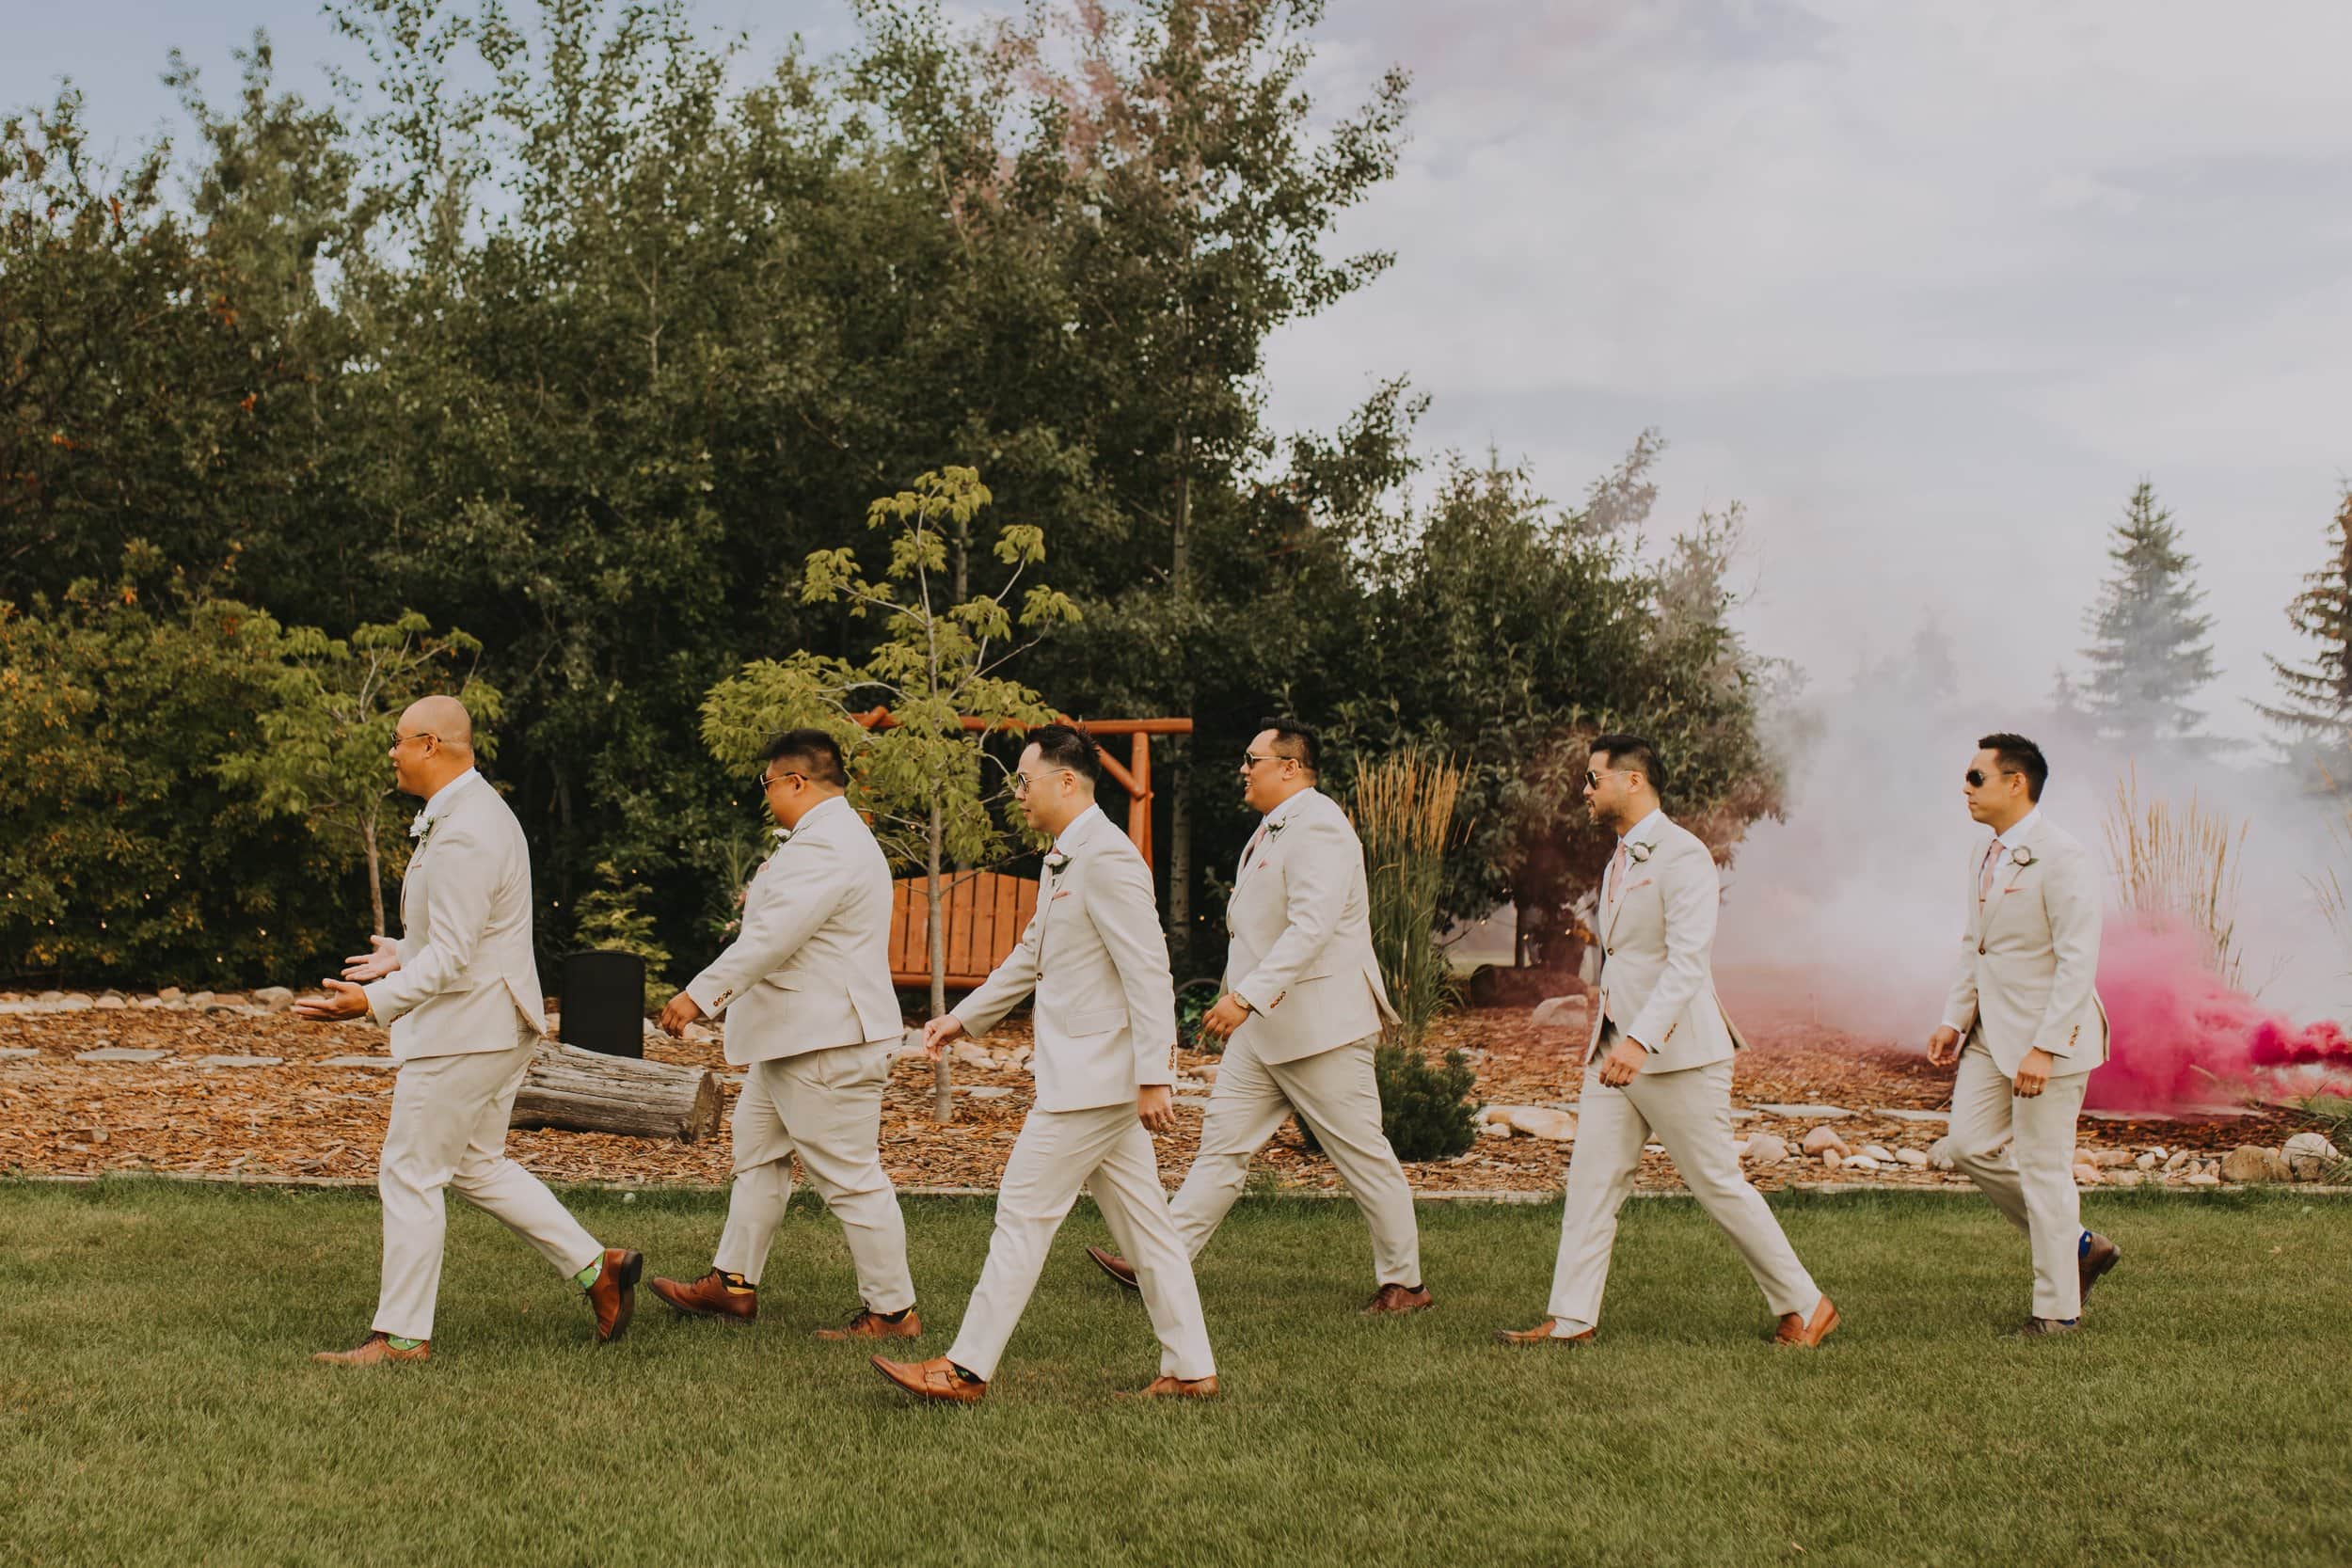 Groomsmen wearing sunglasses and white suits are walking across grass, there is a pink smoke bomb behind them